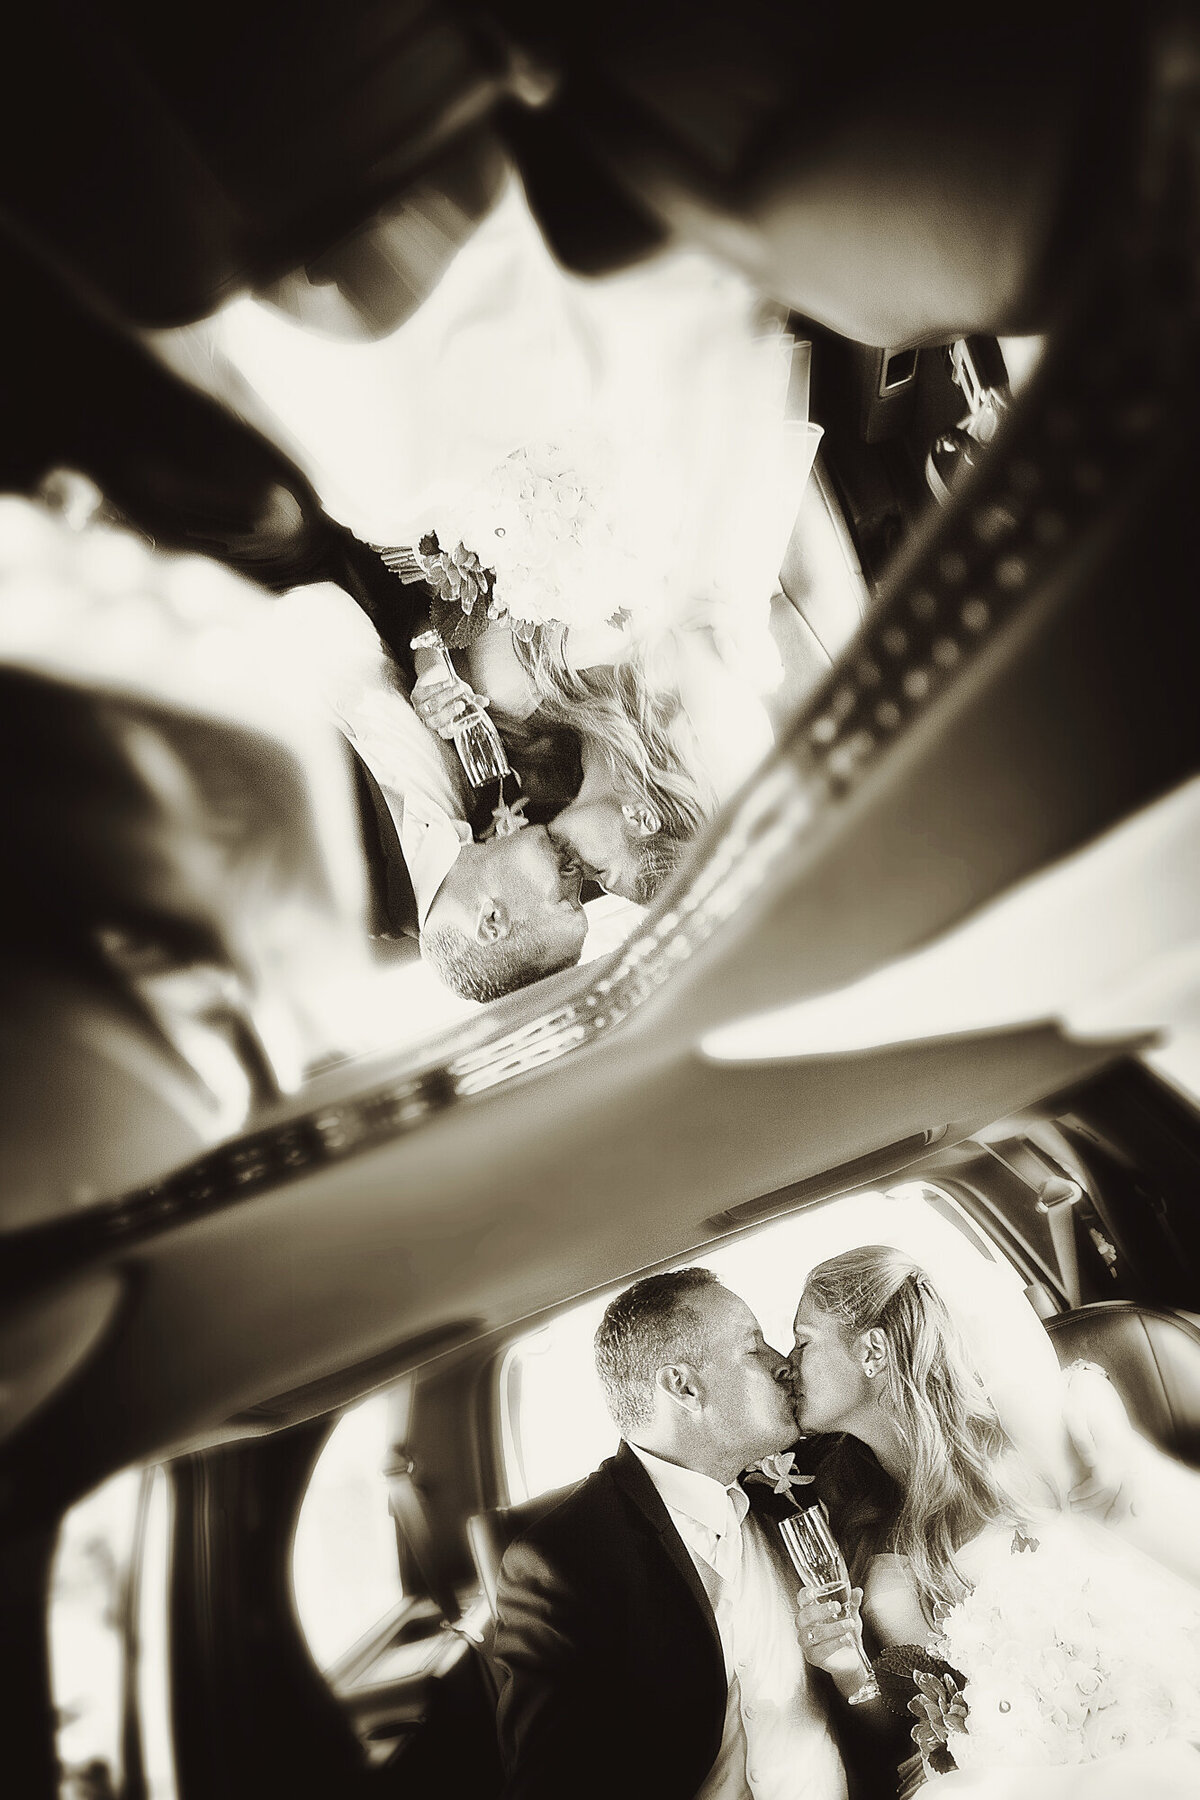 An artistic shot of a bride and groom kissing inside a limo.